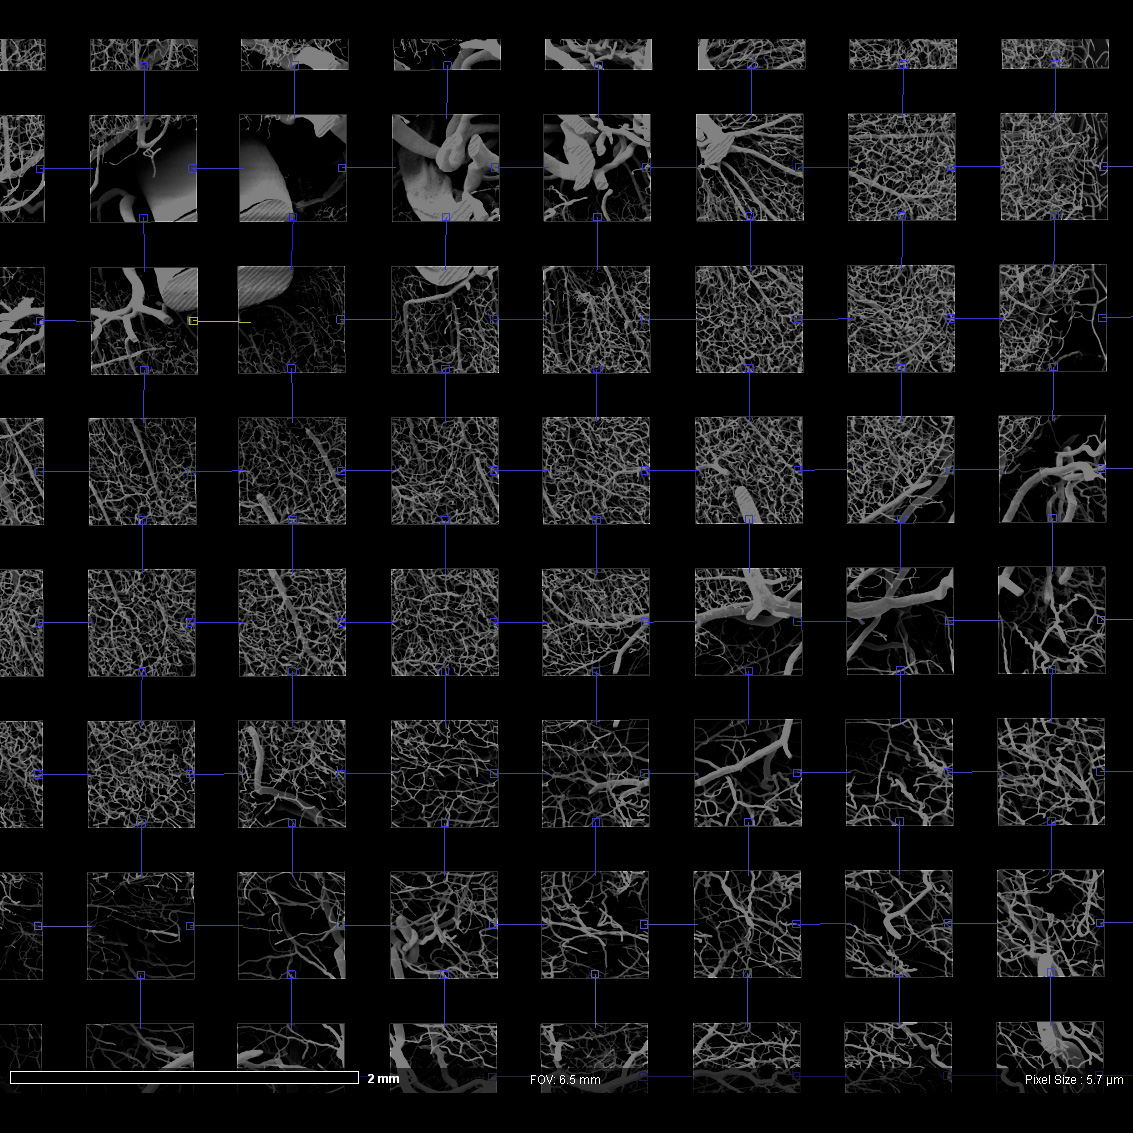 Automated stitching of these tile images to calculate one image of the monkey brain with a large field of view.